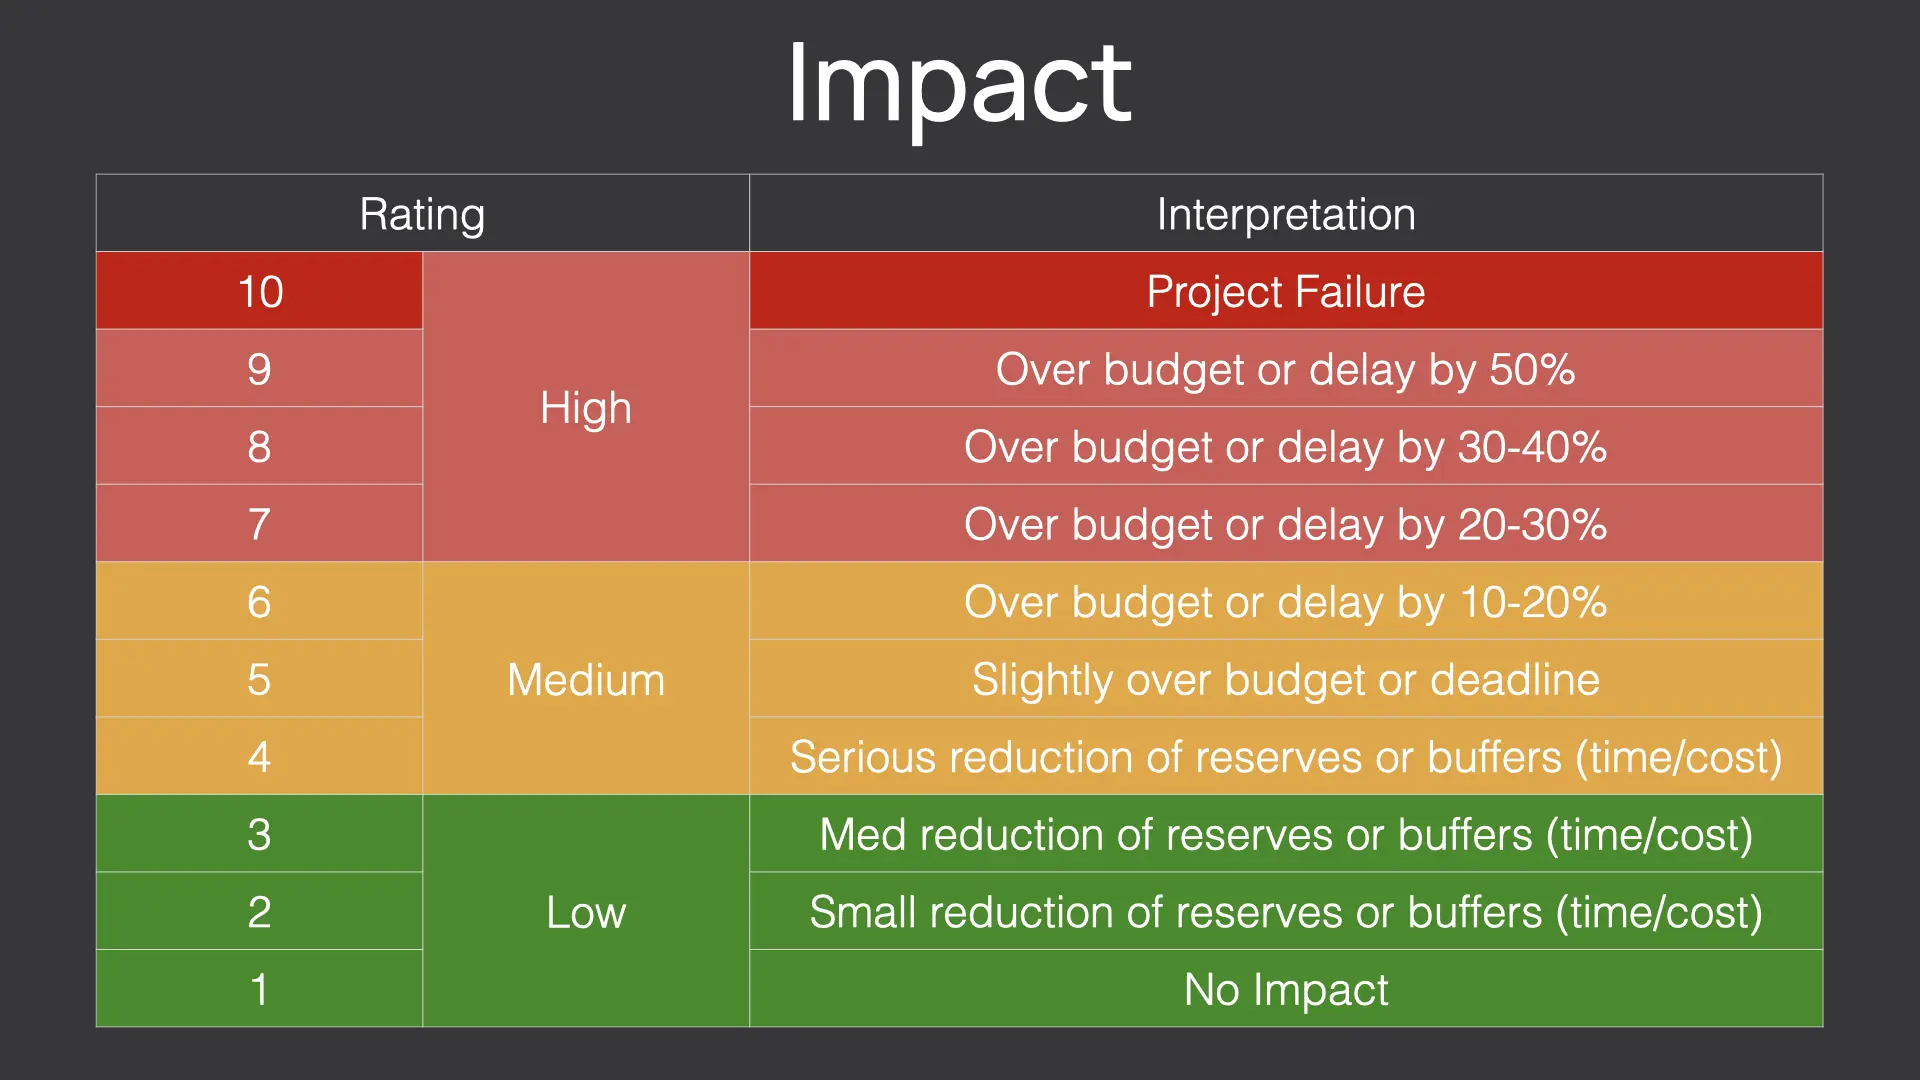 Simple Impact Interpretation Map can be created in spreadsheets